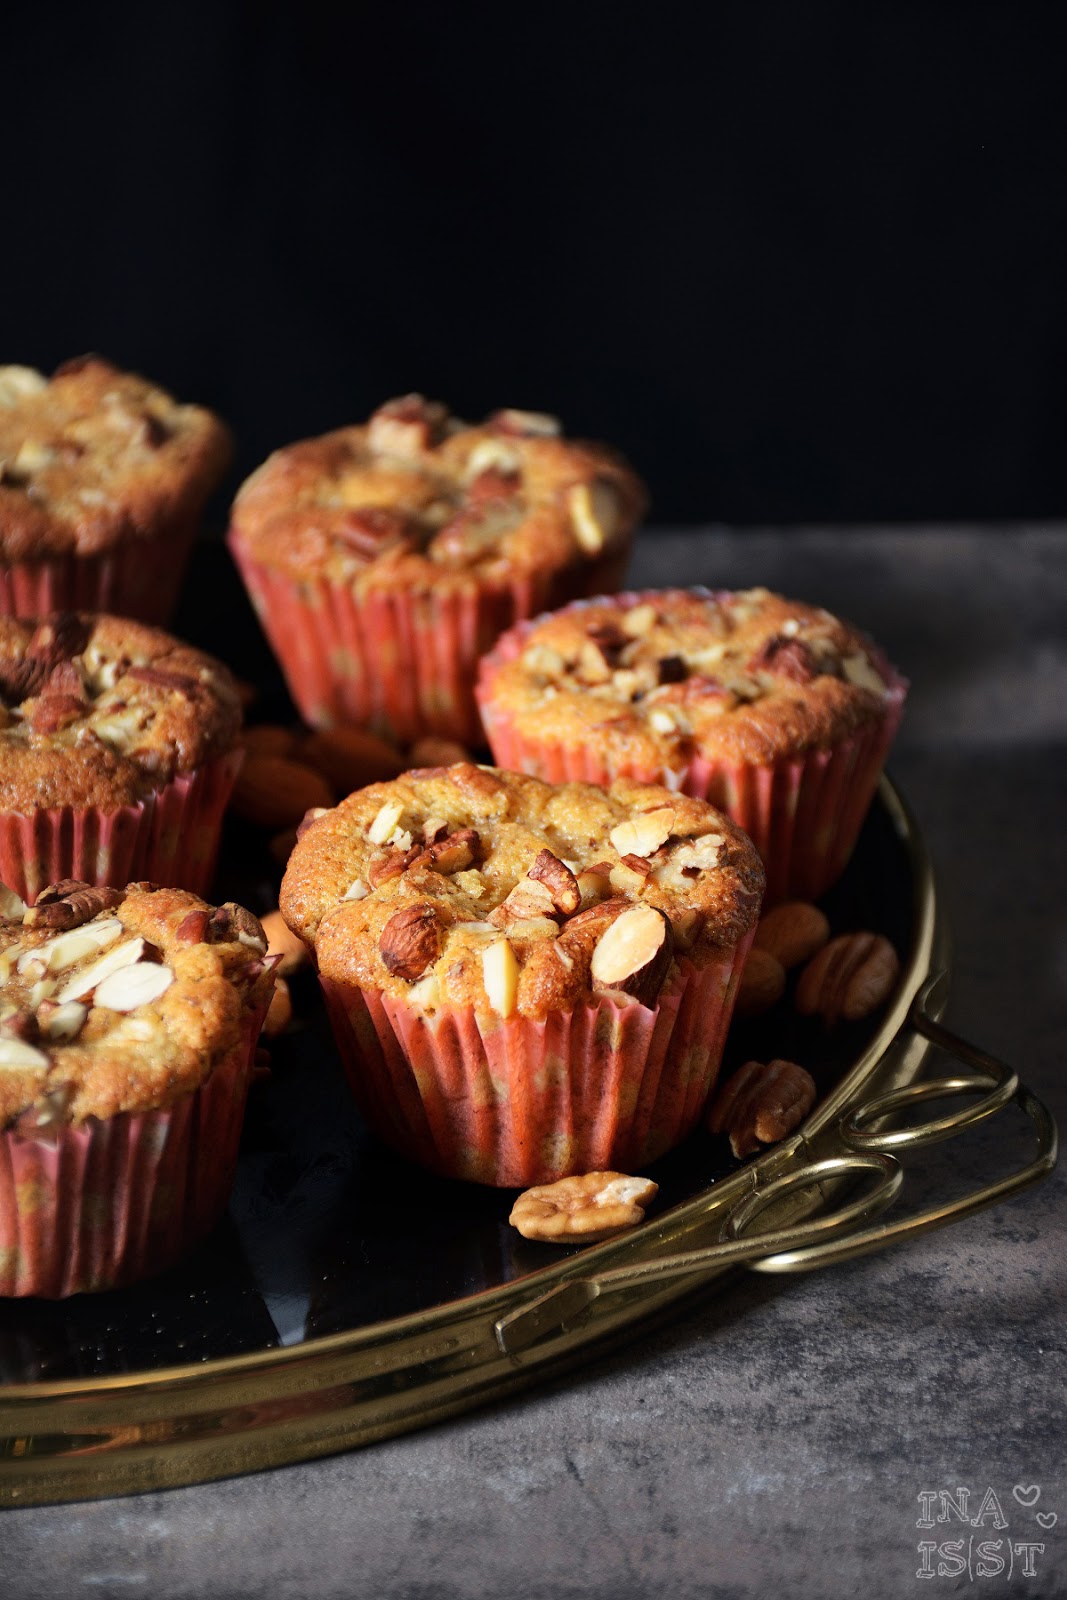 Ina Is(s)t: Saftige Apfel-Nuss-Muffins / Juicy nut muffins with apple